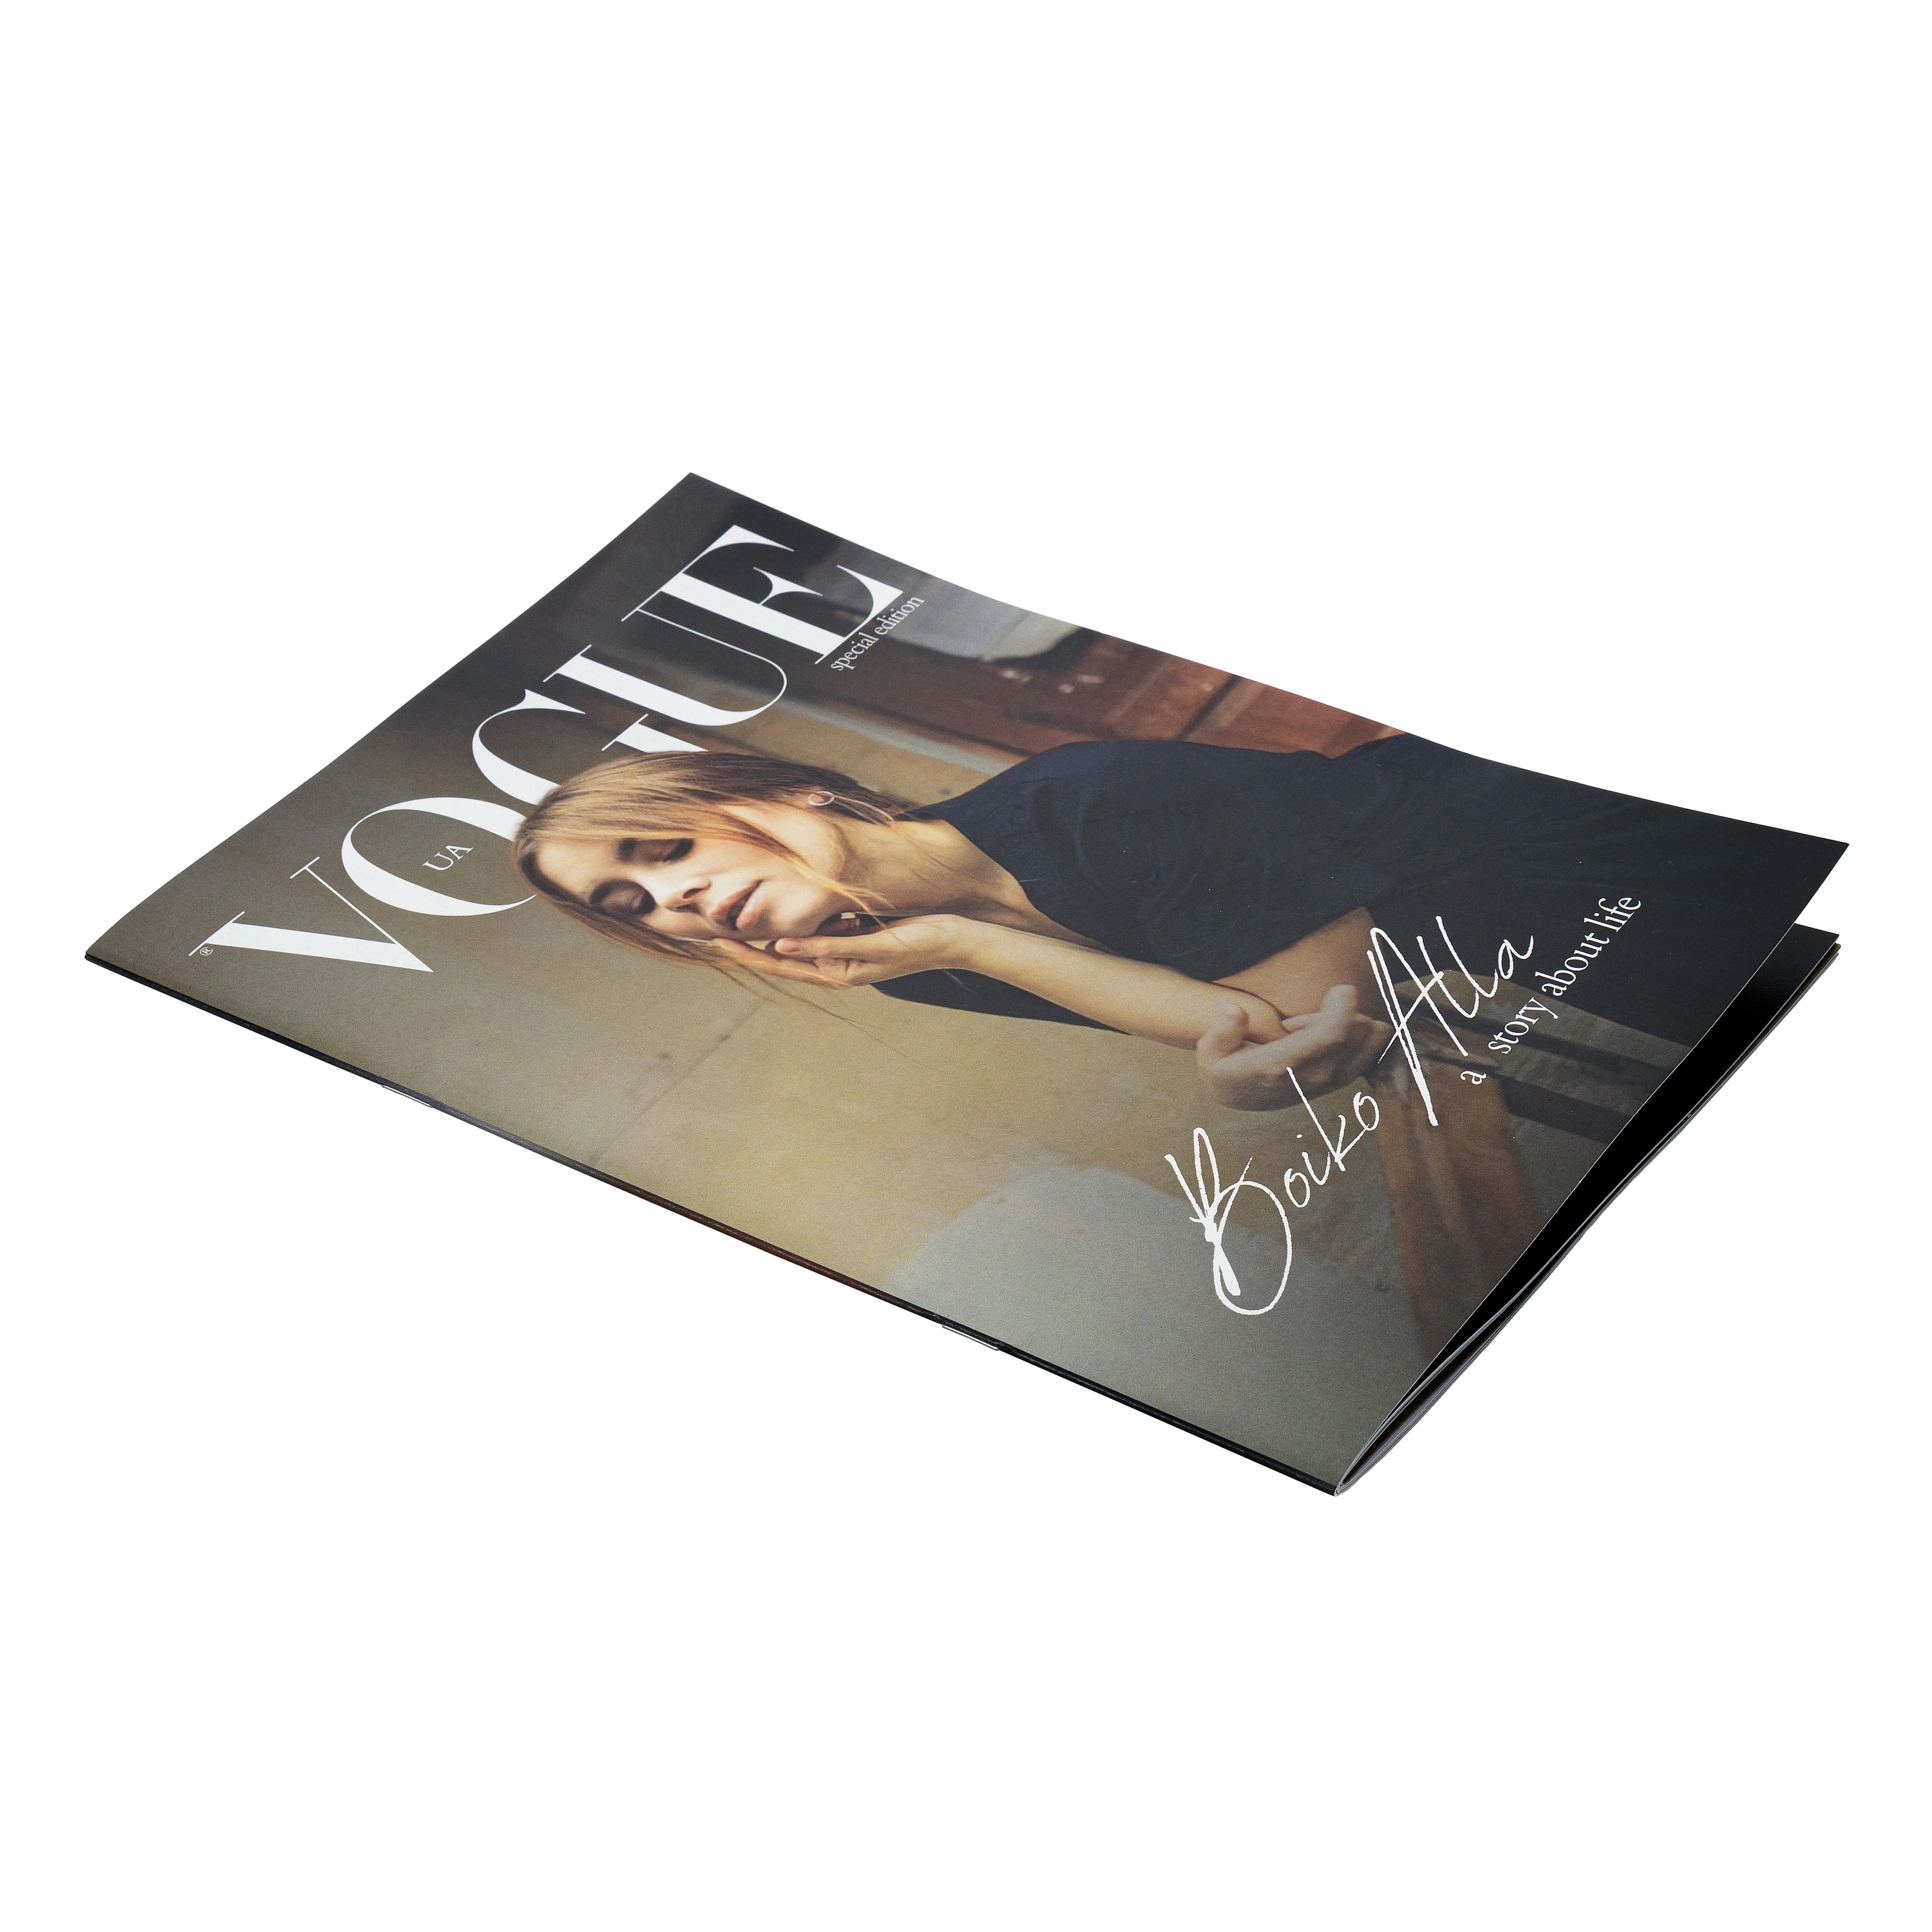 Own glossy magazines - Printto: